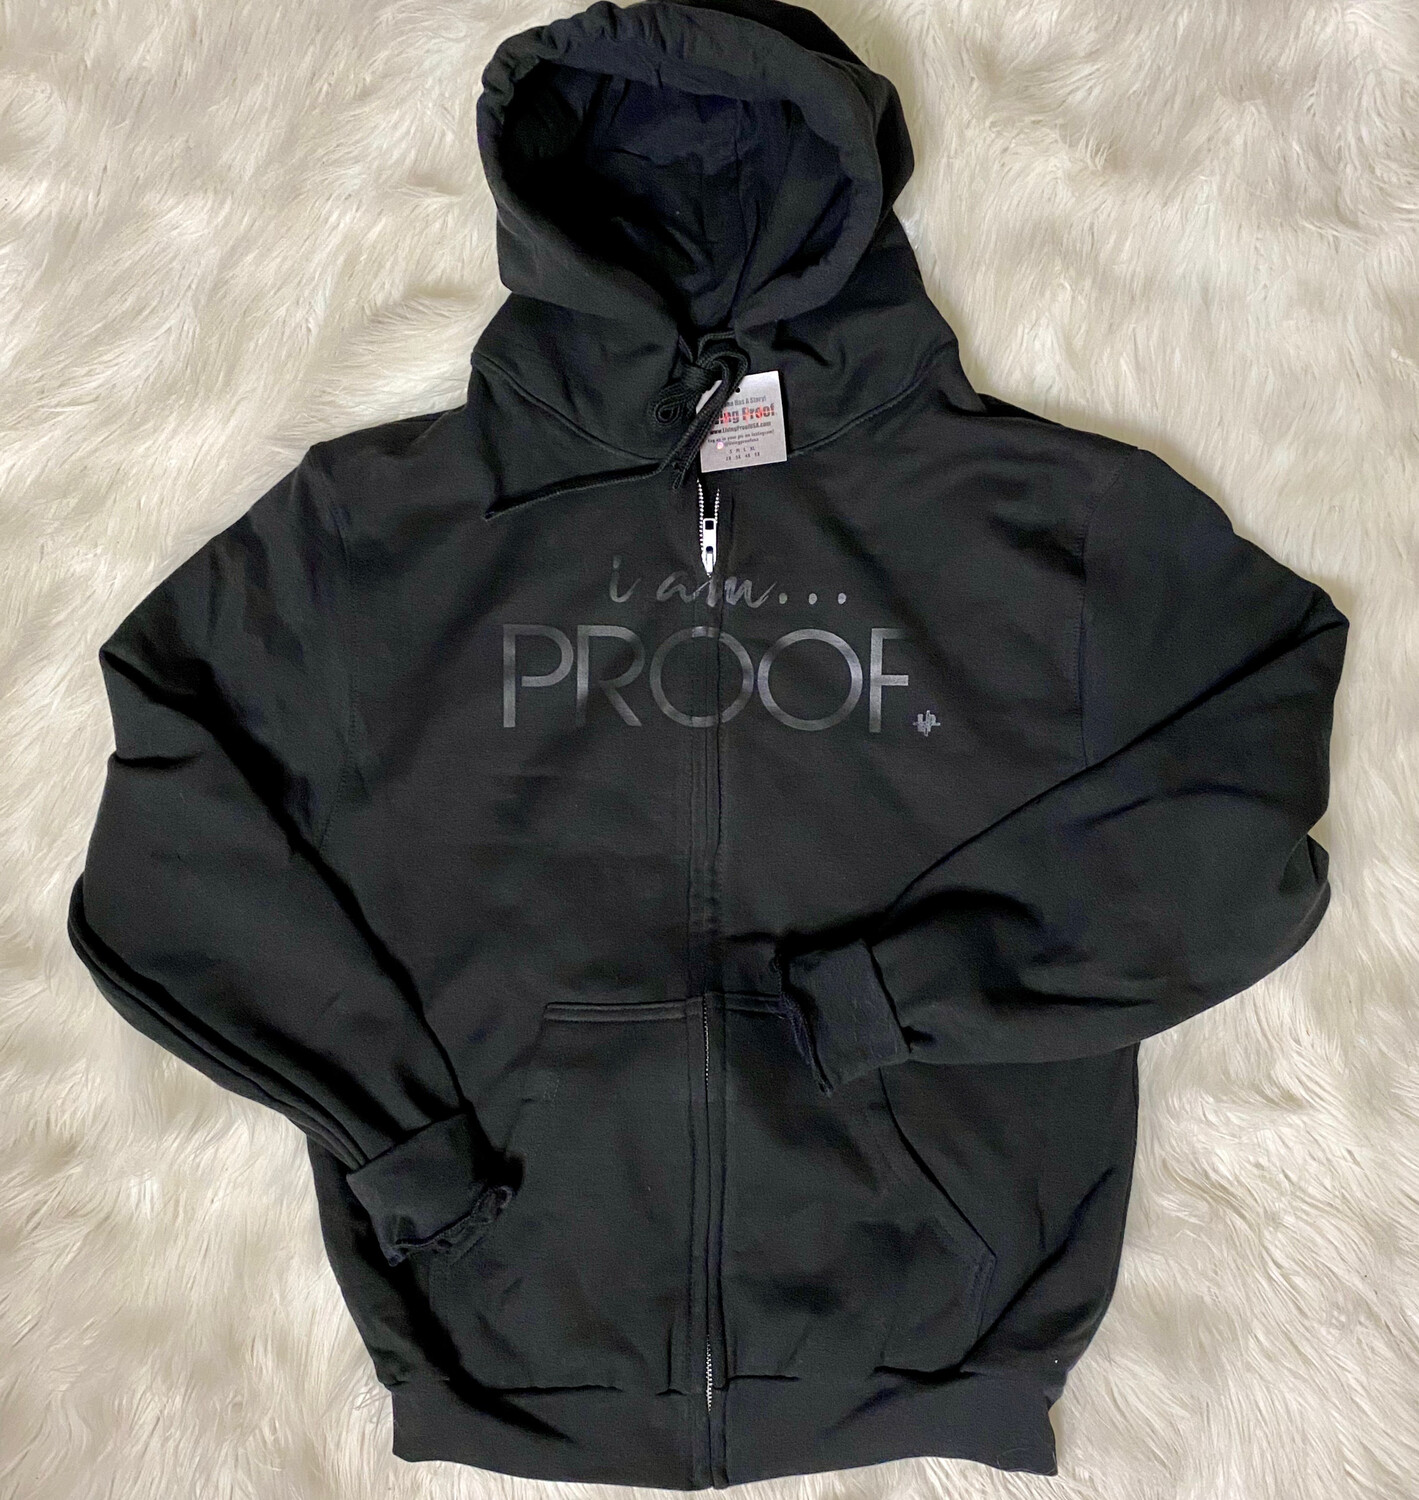 “i am PROOF” Zip Up Hoodies (click on photo to view available colors)